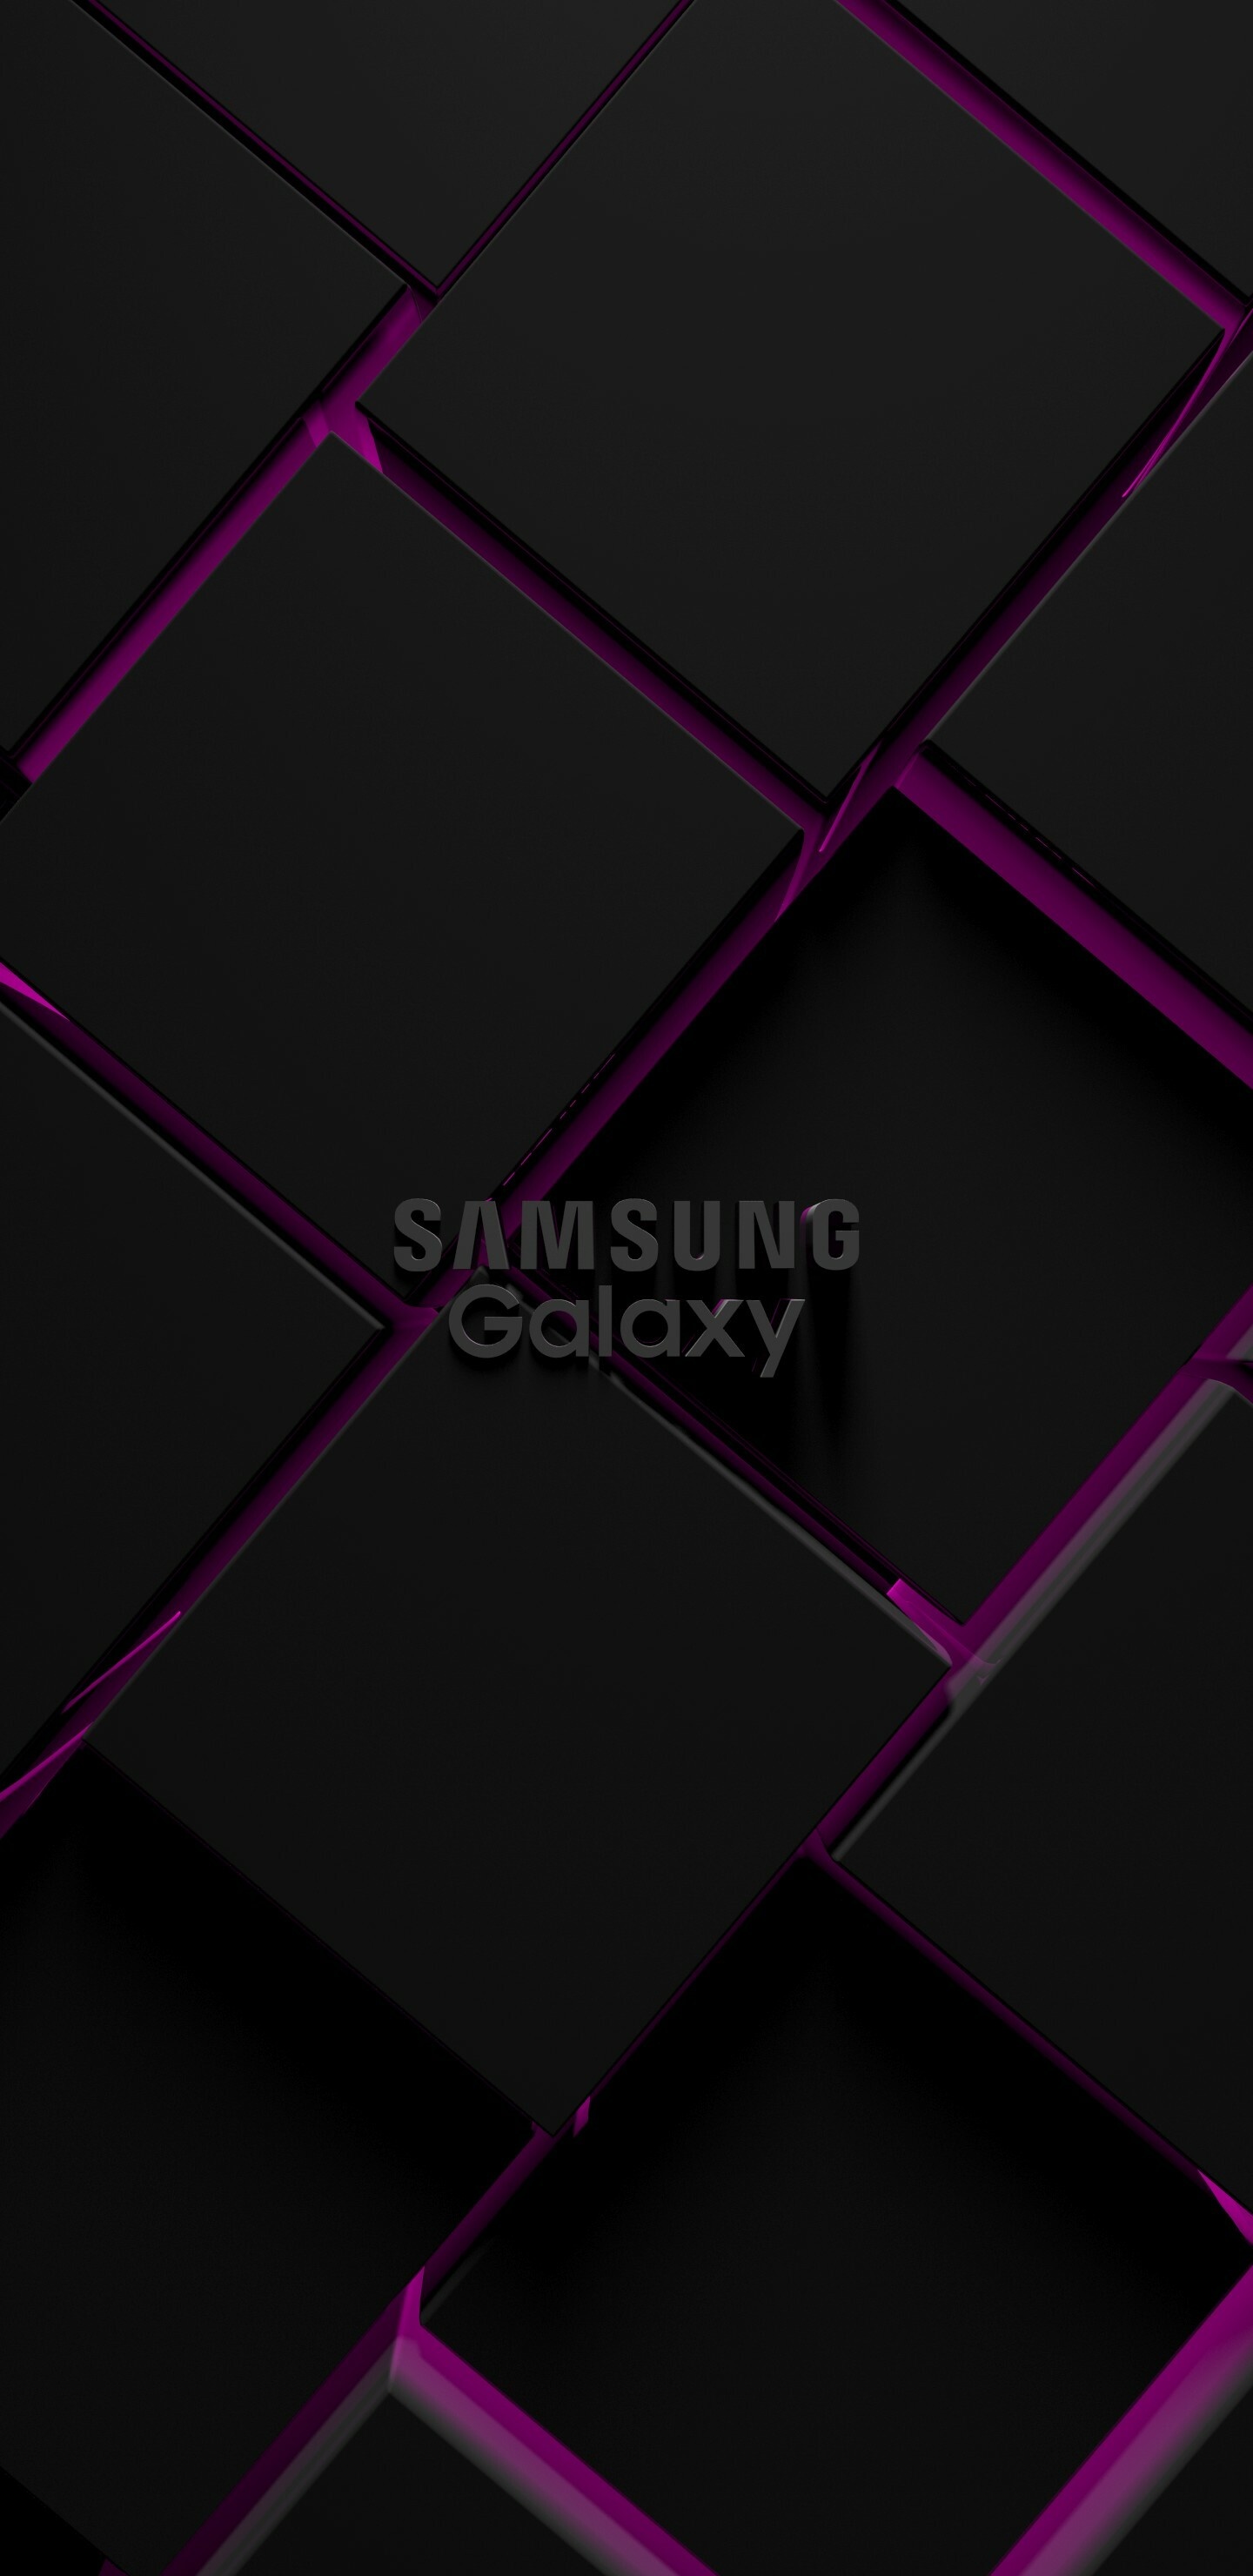 Samsung: Galaxy devices, Highly innovative Android smartphones and tablets. 1440x2960 HD Wallpaper.